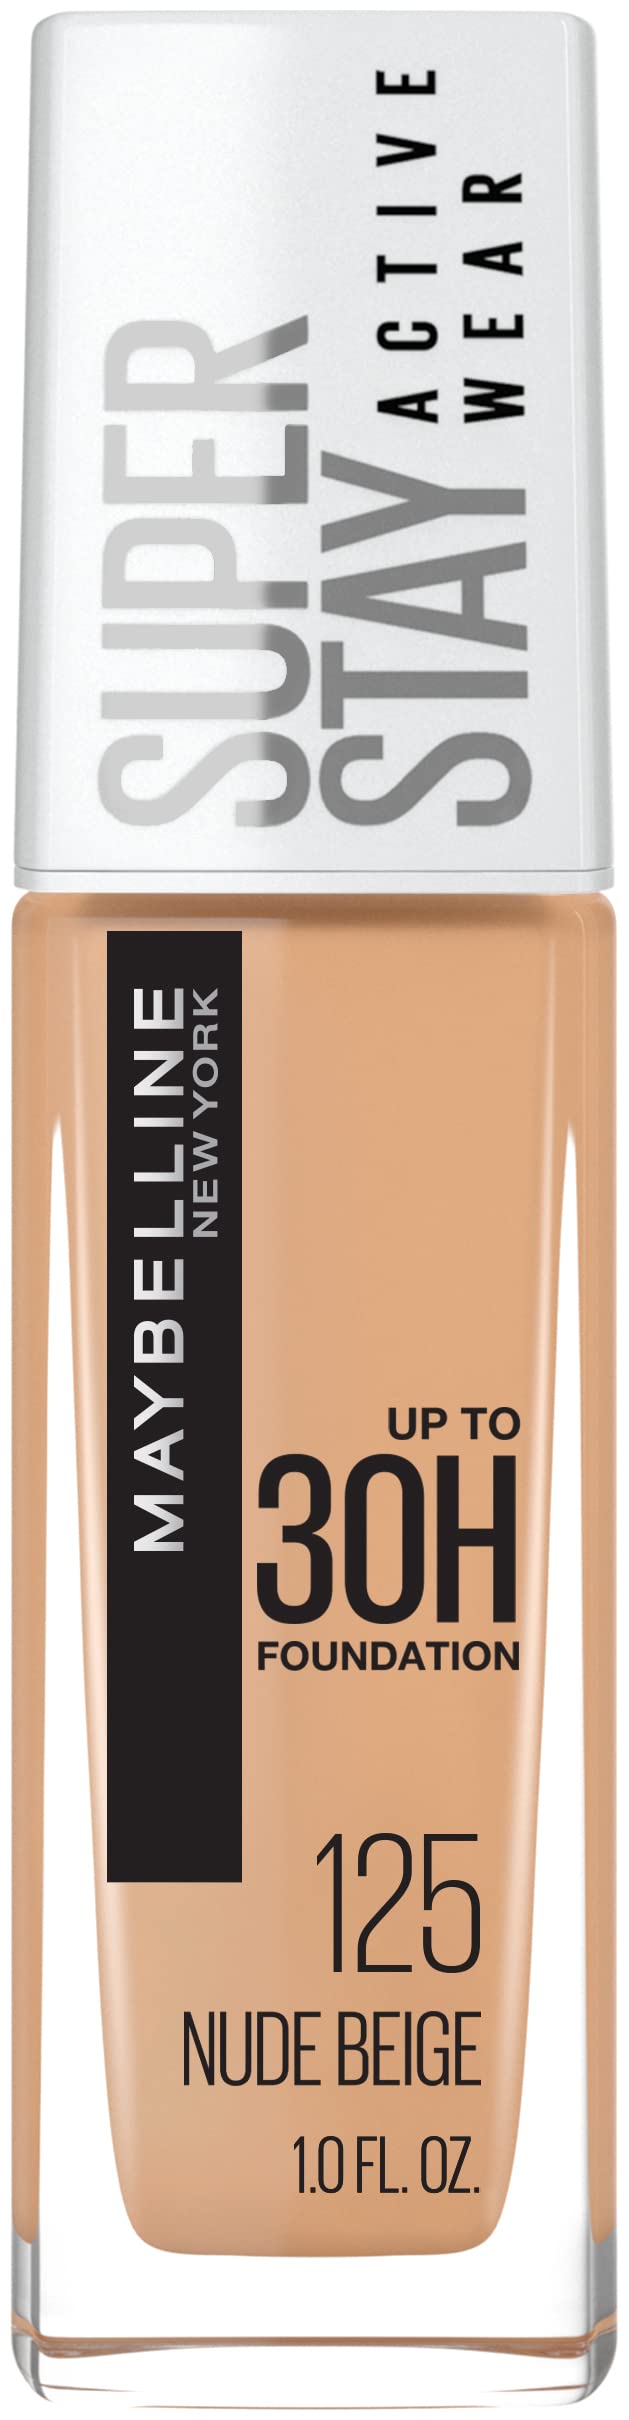 Maybelline New York Super Stay Full Coverage Liquid Foundation Active Wear Makeup, Up to 30Hr Wear, Transfer, Sweat & Water Resistant, Matte Finish, Nude Beige, 1 Count